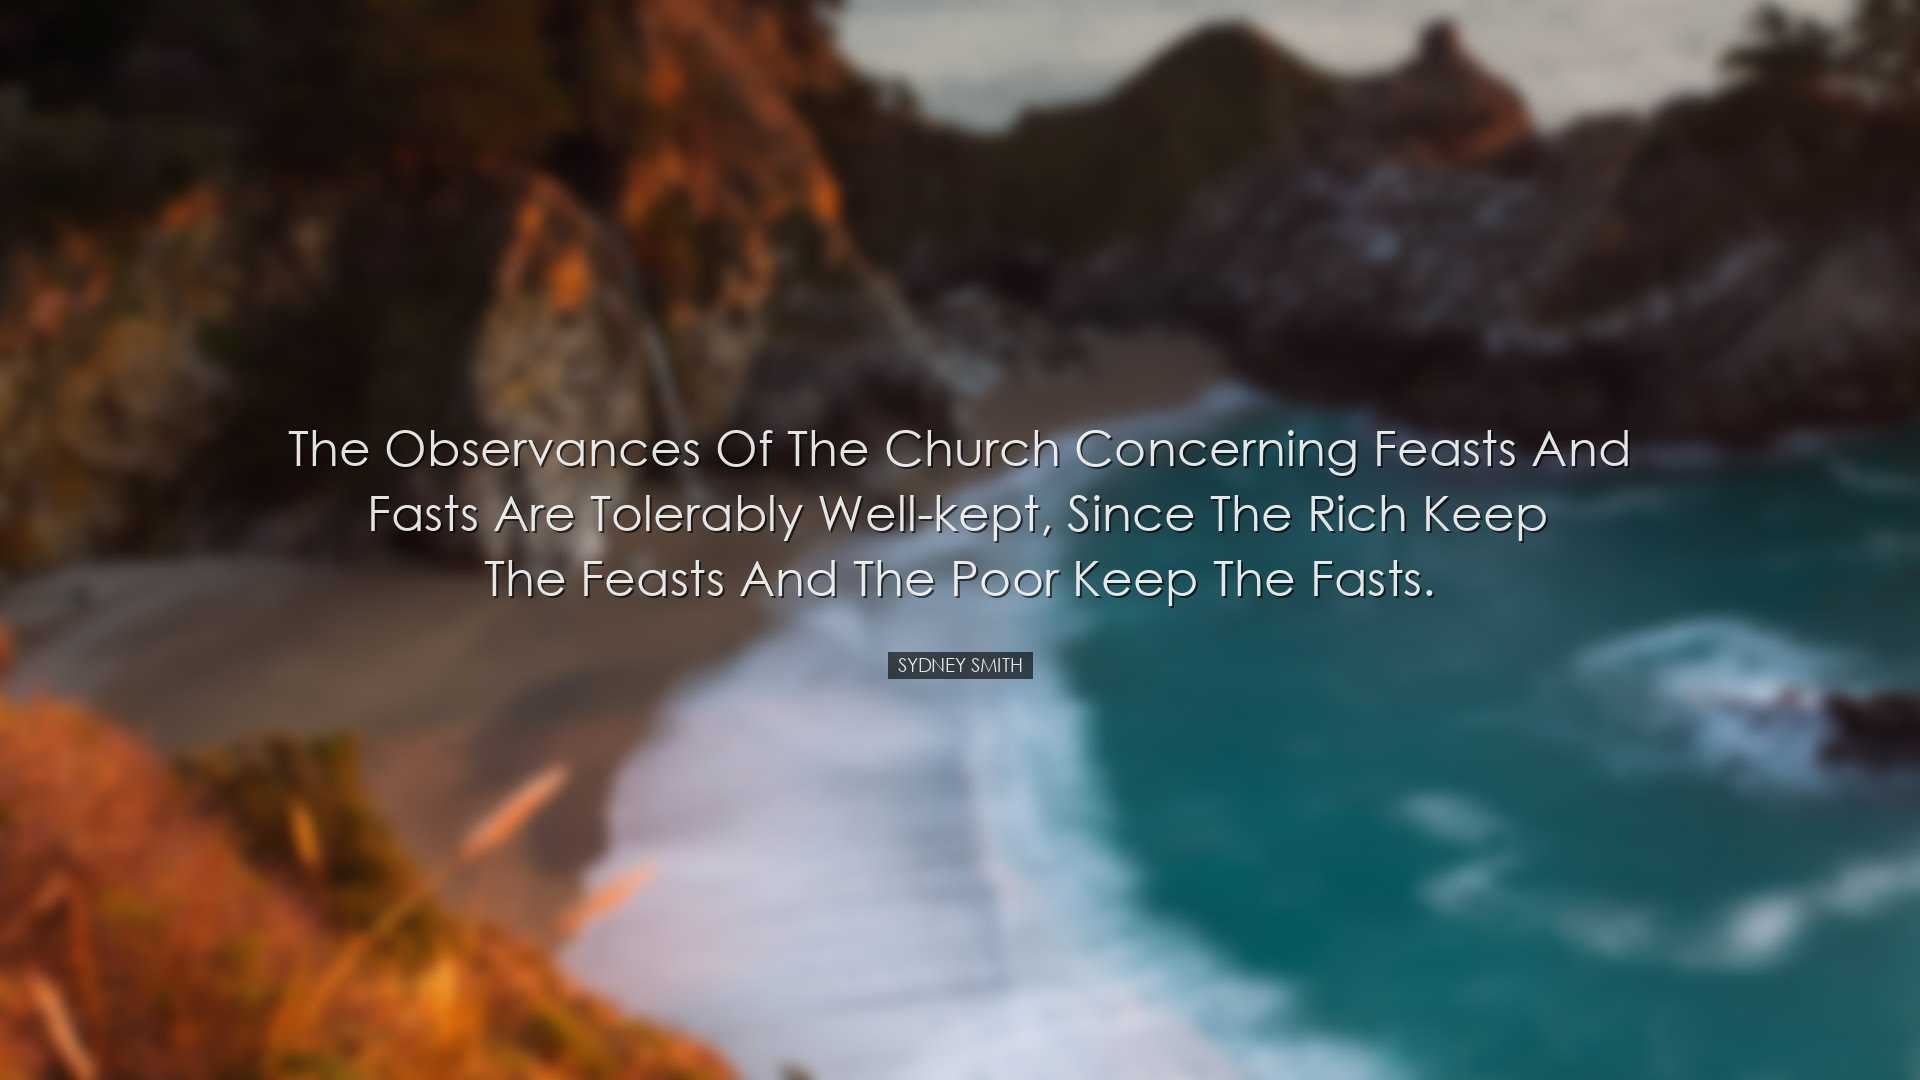 The observances of the church concerning feasts and fasts are tole